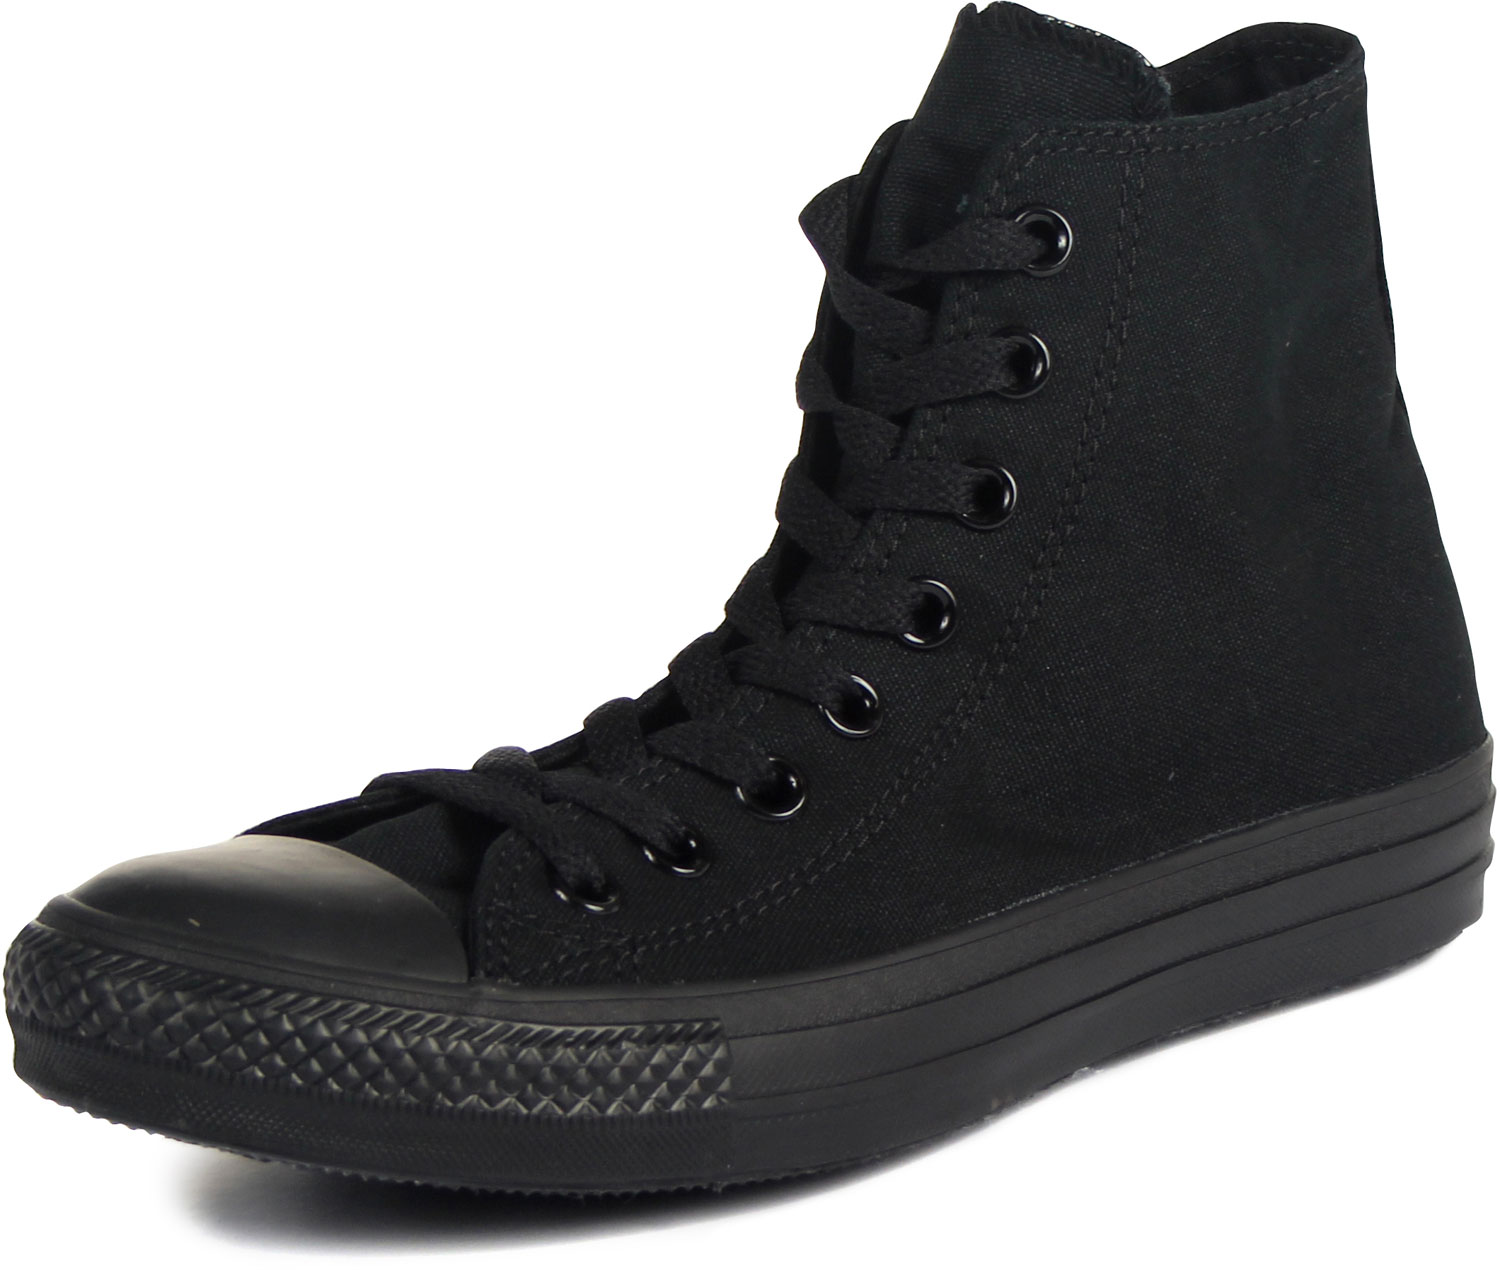 converse chuck taylor all star high top black trainers